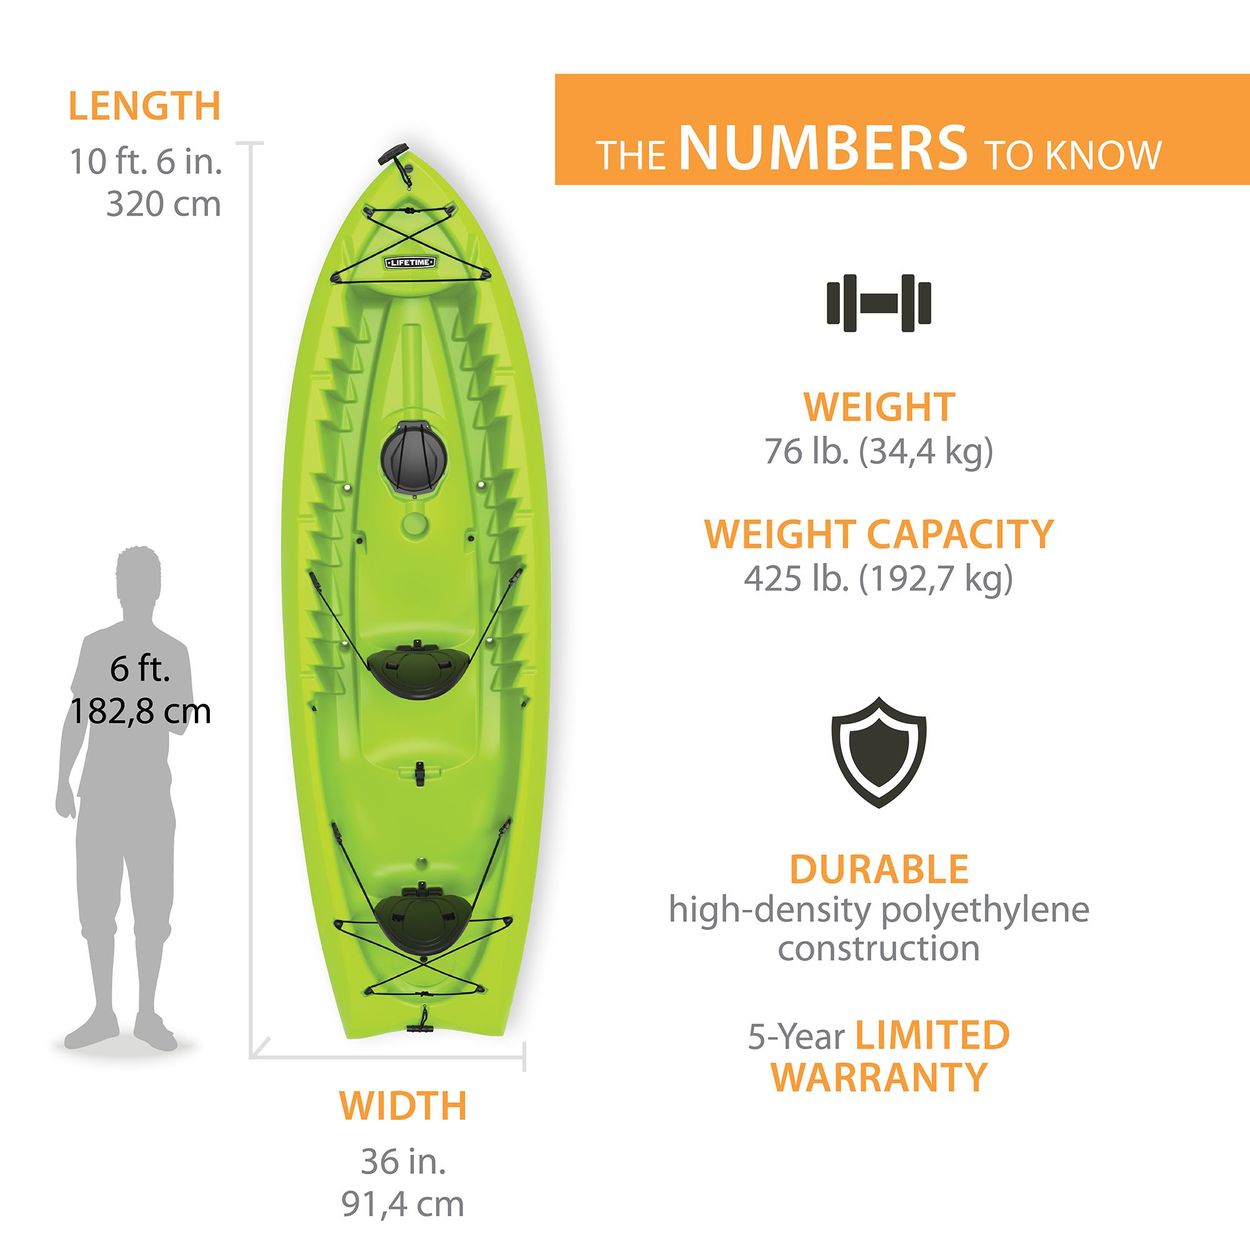 Studio image of the top of the kayak with Features by the number including length of kayak (10 ft 6 in.), weight (76 lbs), weight capacity (425 lbs) and warranty (5-Year Limited).